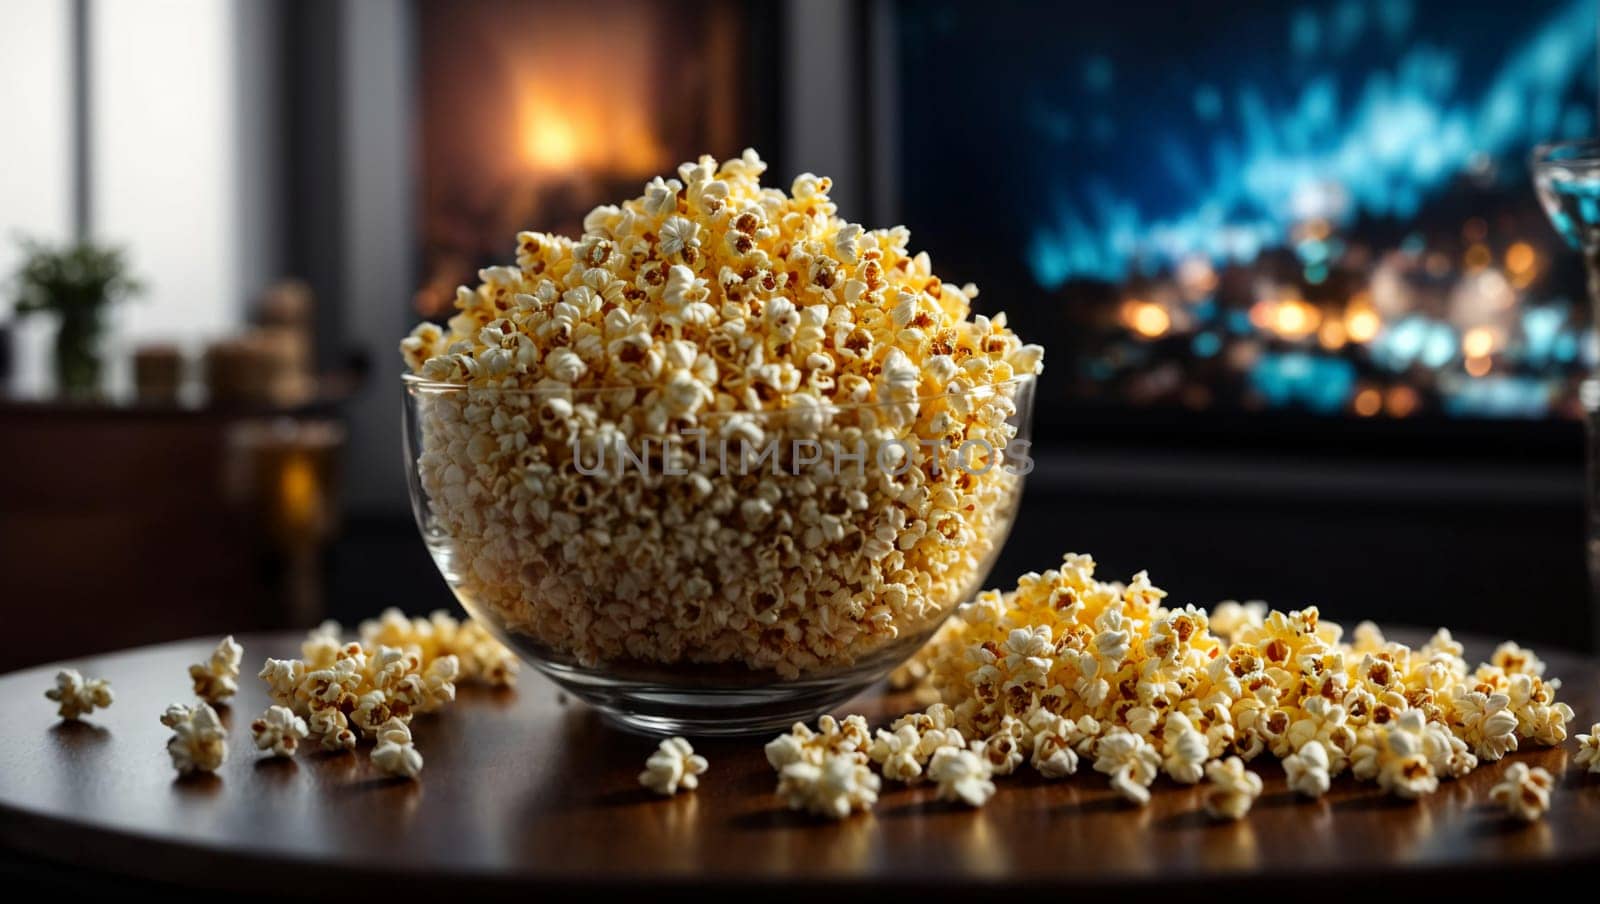 Popcorn in a glass bowl in front of the TV in the home interior.